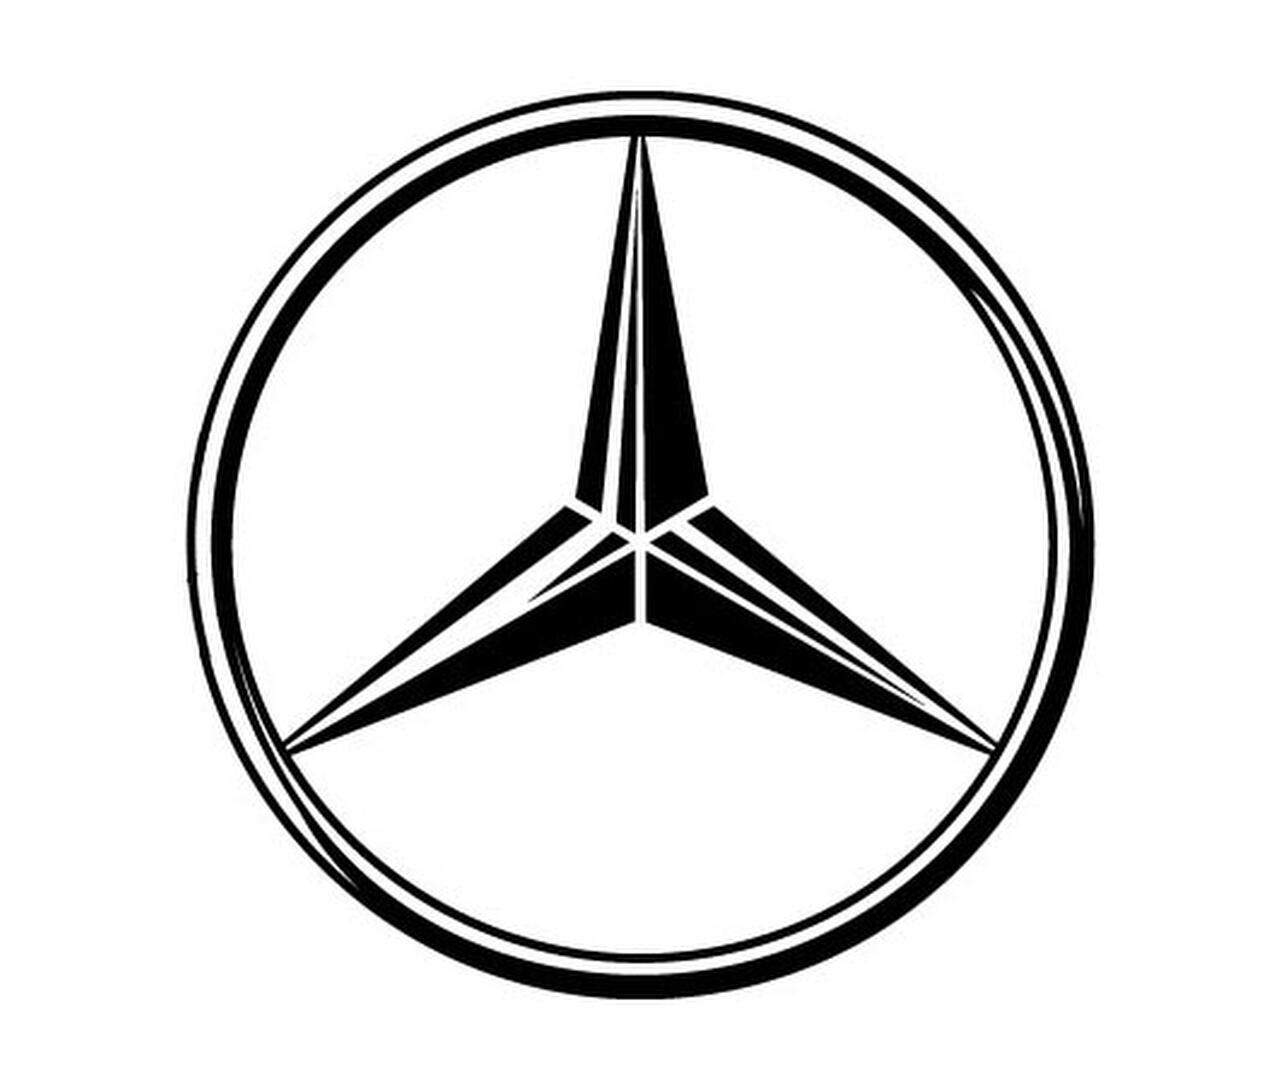 The Mercedes-Benz logo was adopted in 2008